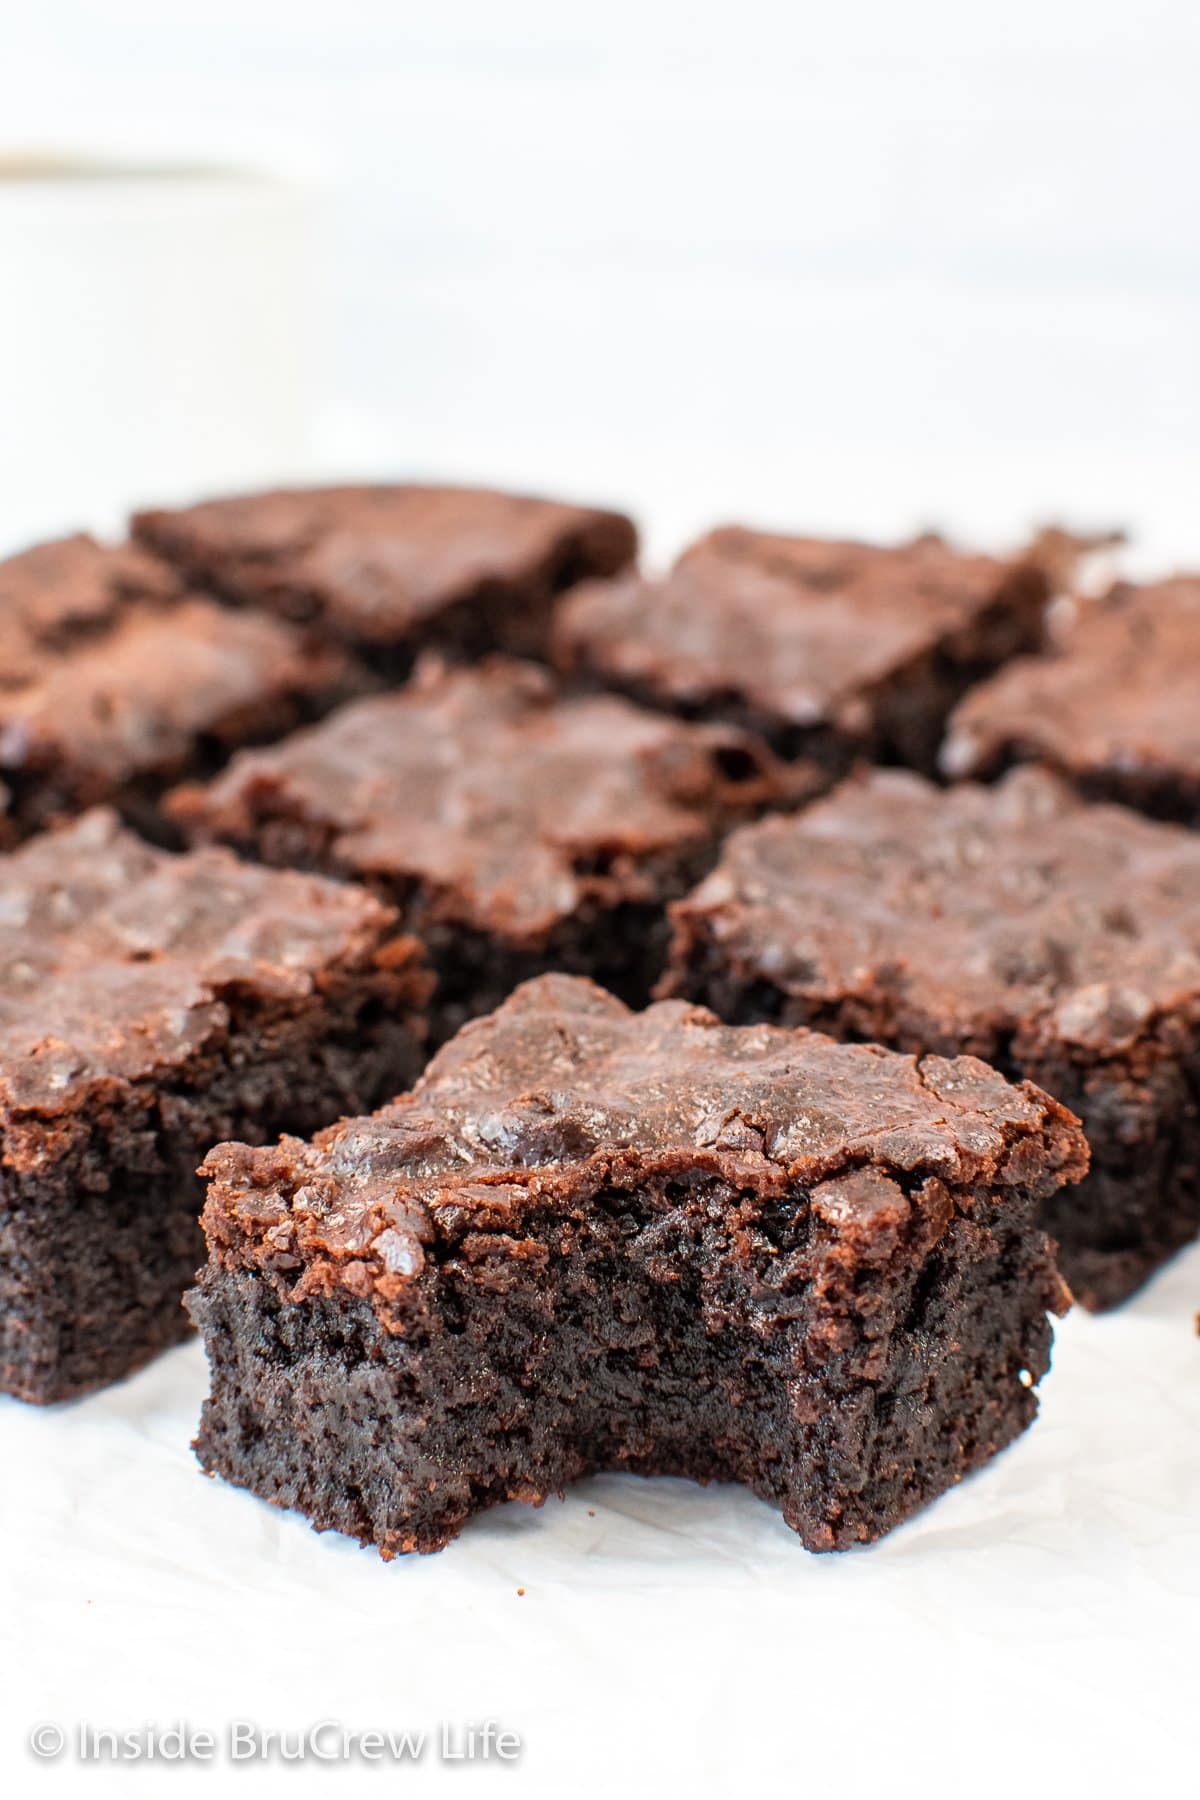 Squares of chocolate brownies sitting on a white background.